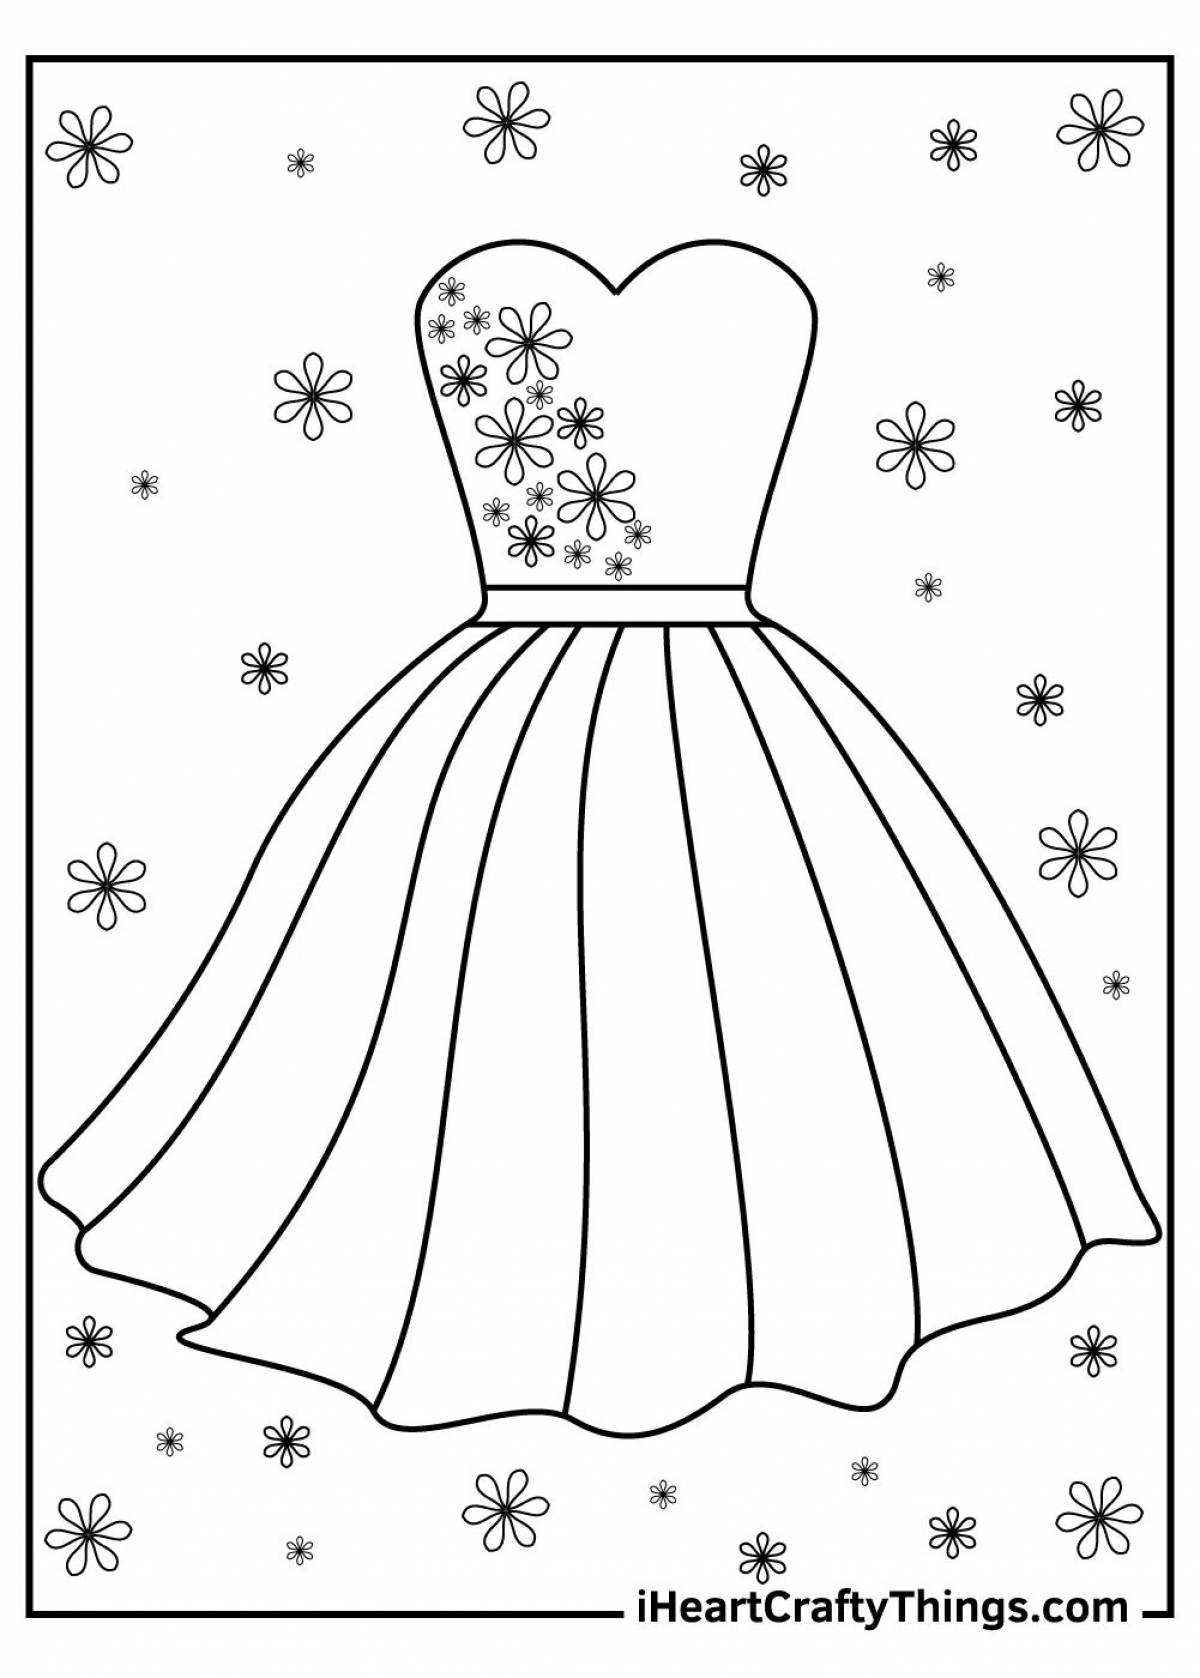 Adorable dress coloring page for children 5-6 years old